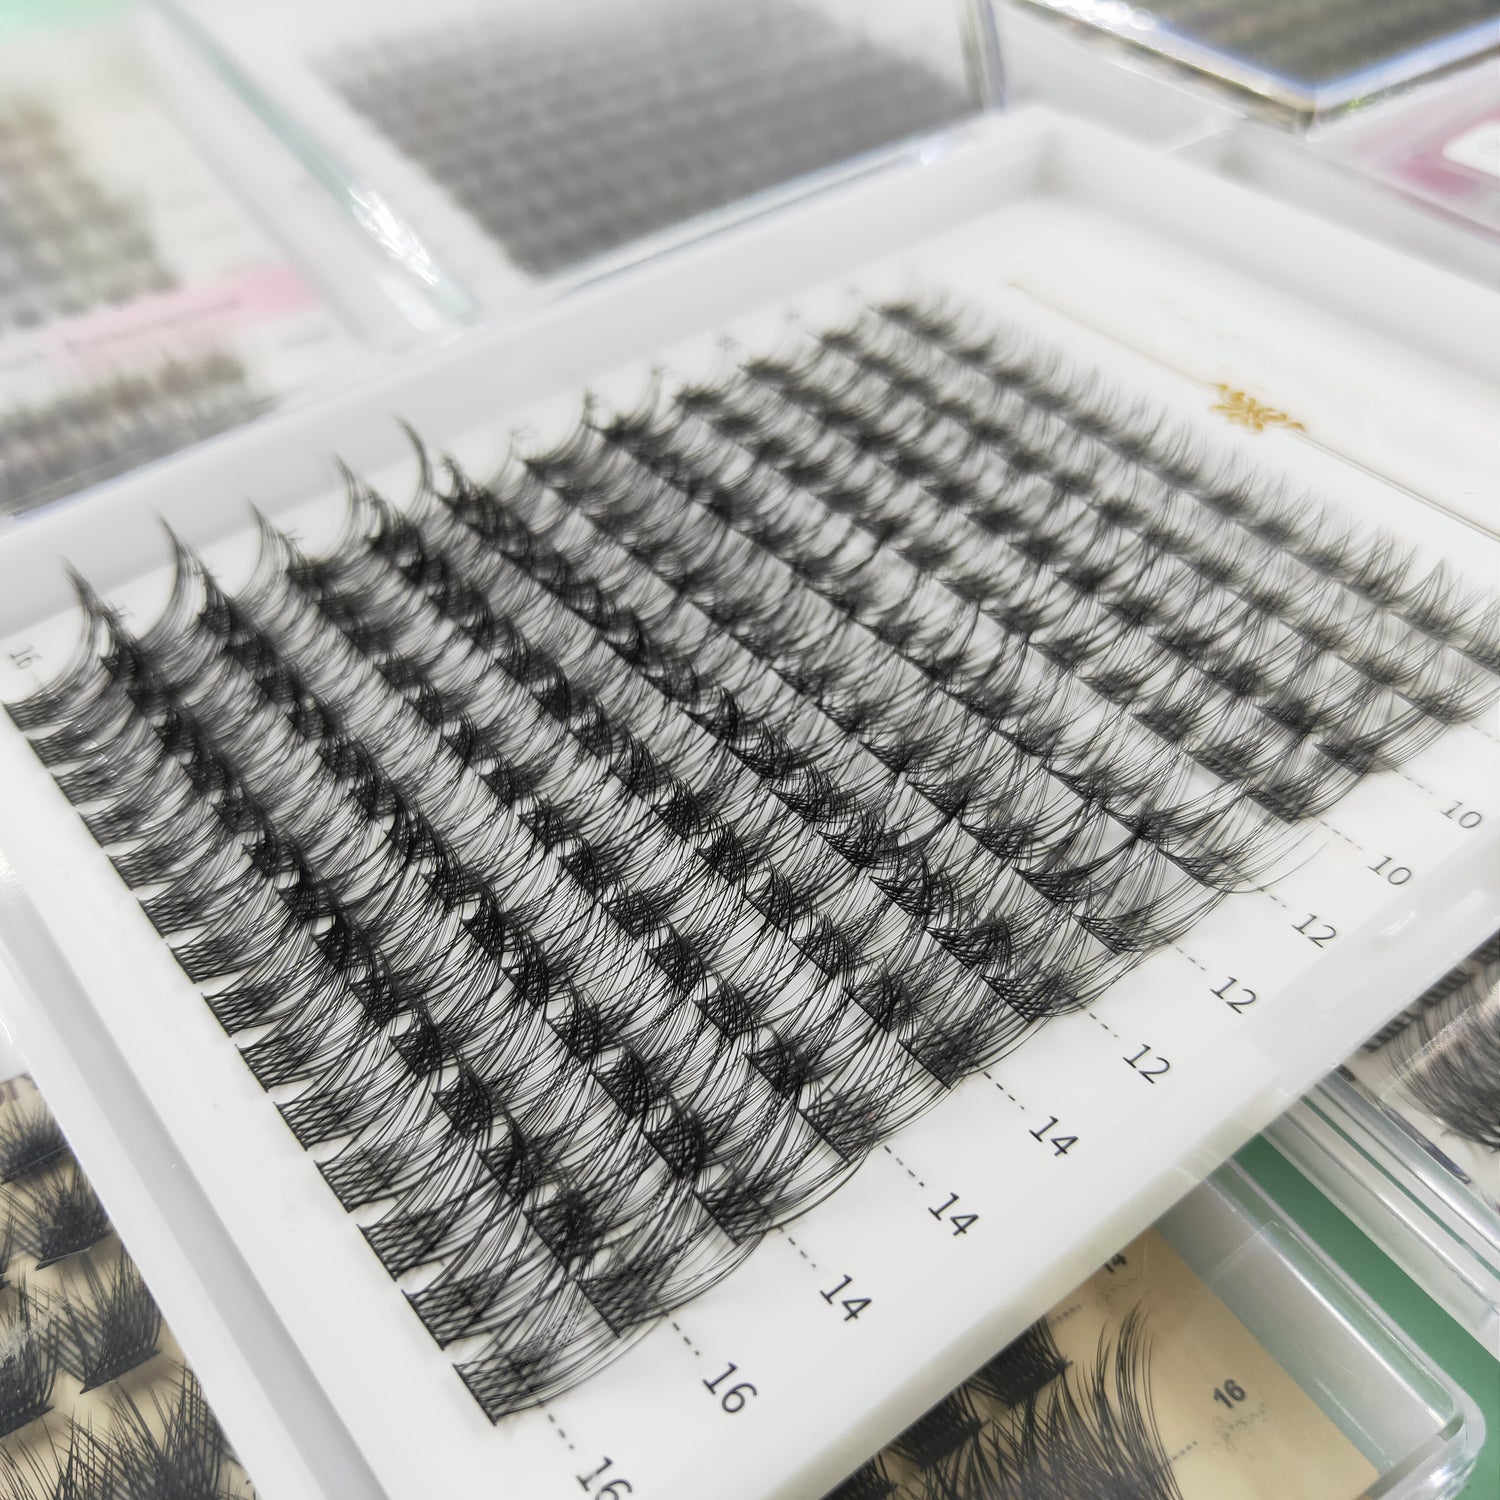 Production Private Label Segmented Eyelashes Supplier